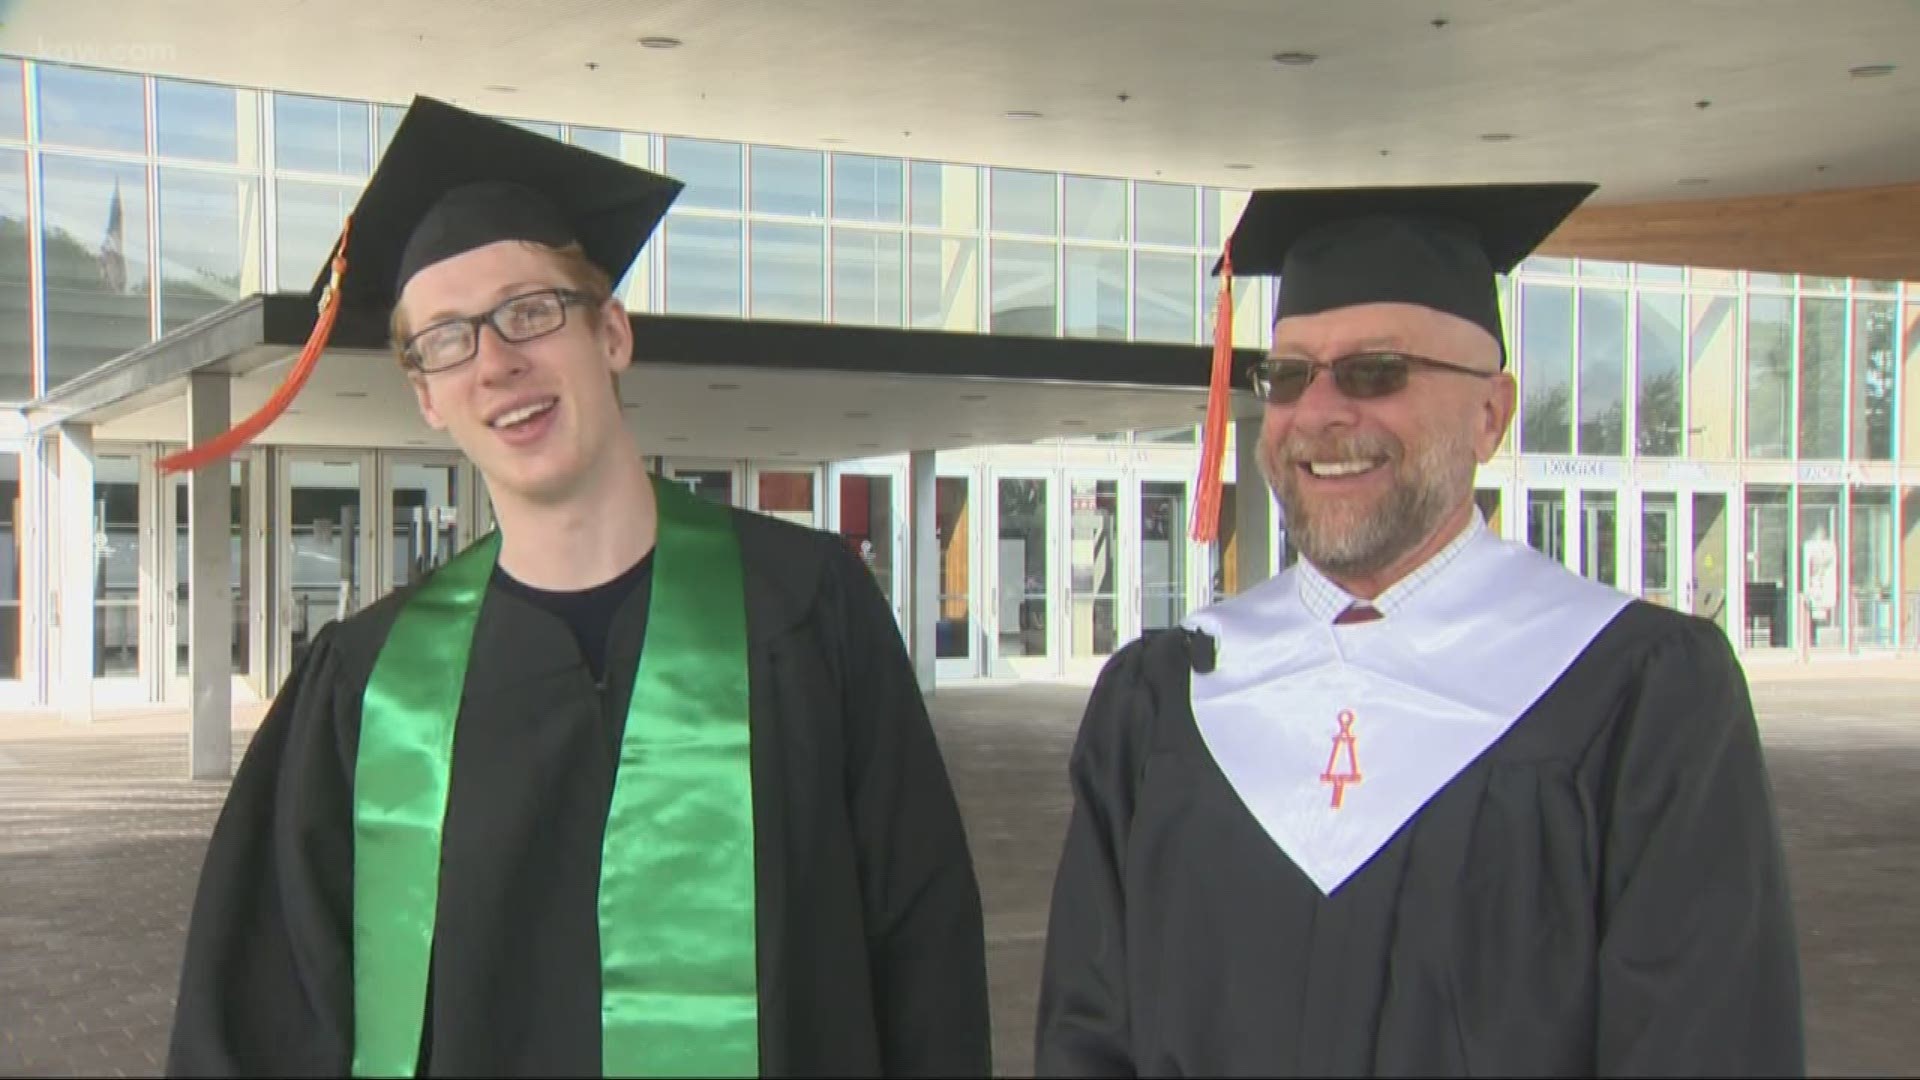 For one local father and son, this Father’s Day was about celebrating each other. Don and Jacob Sheeran graduated together from Portland State University on Father’s Day.